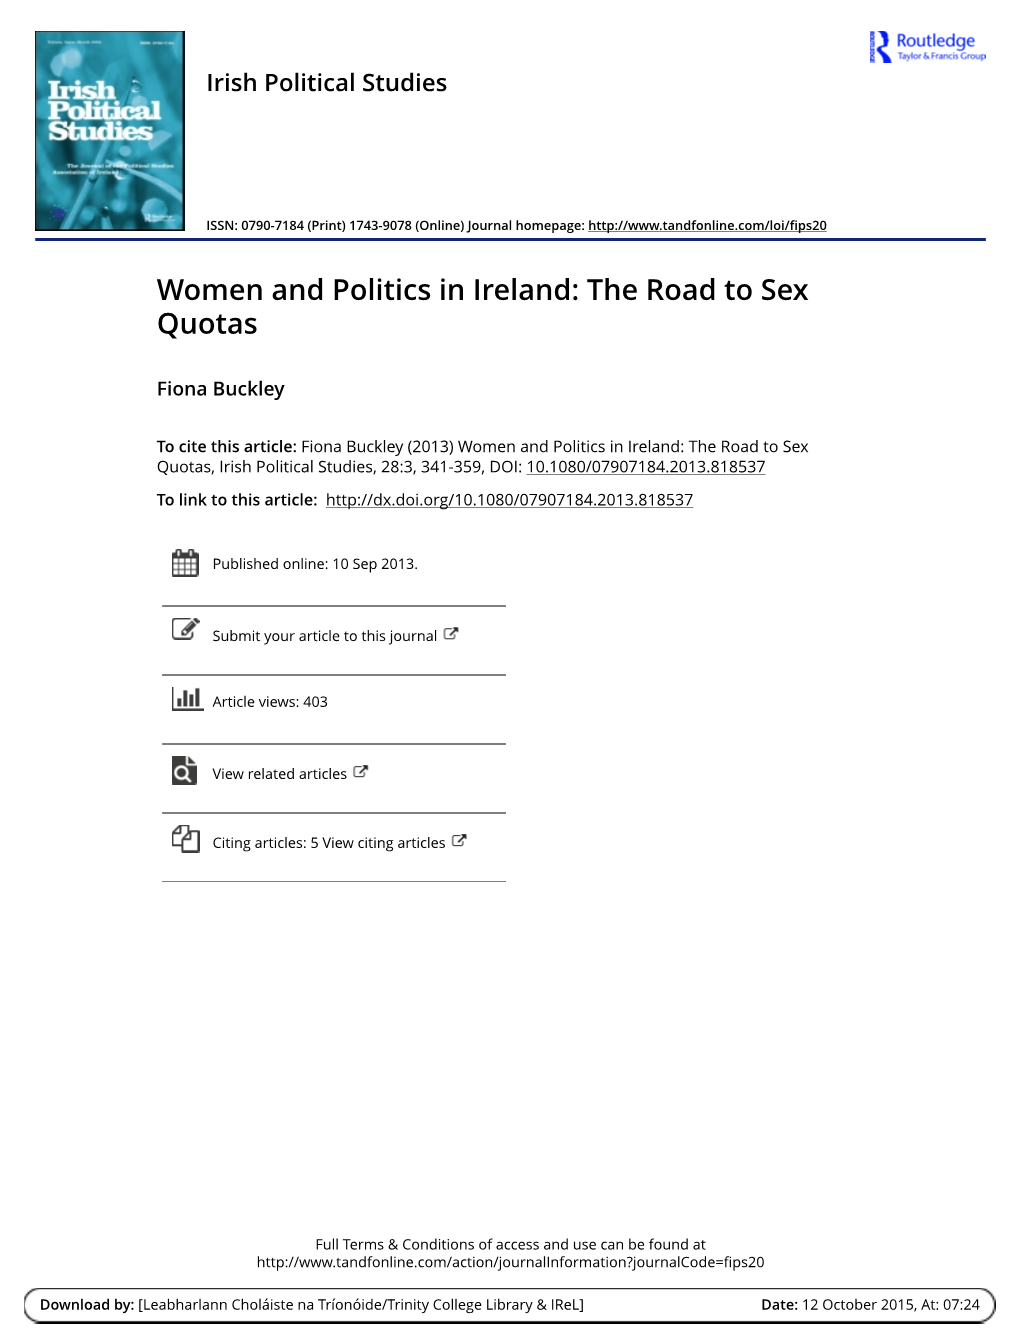 Women and Politics in Ireland: the Road to Sex Quotas